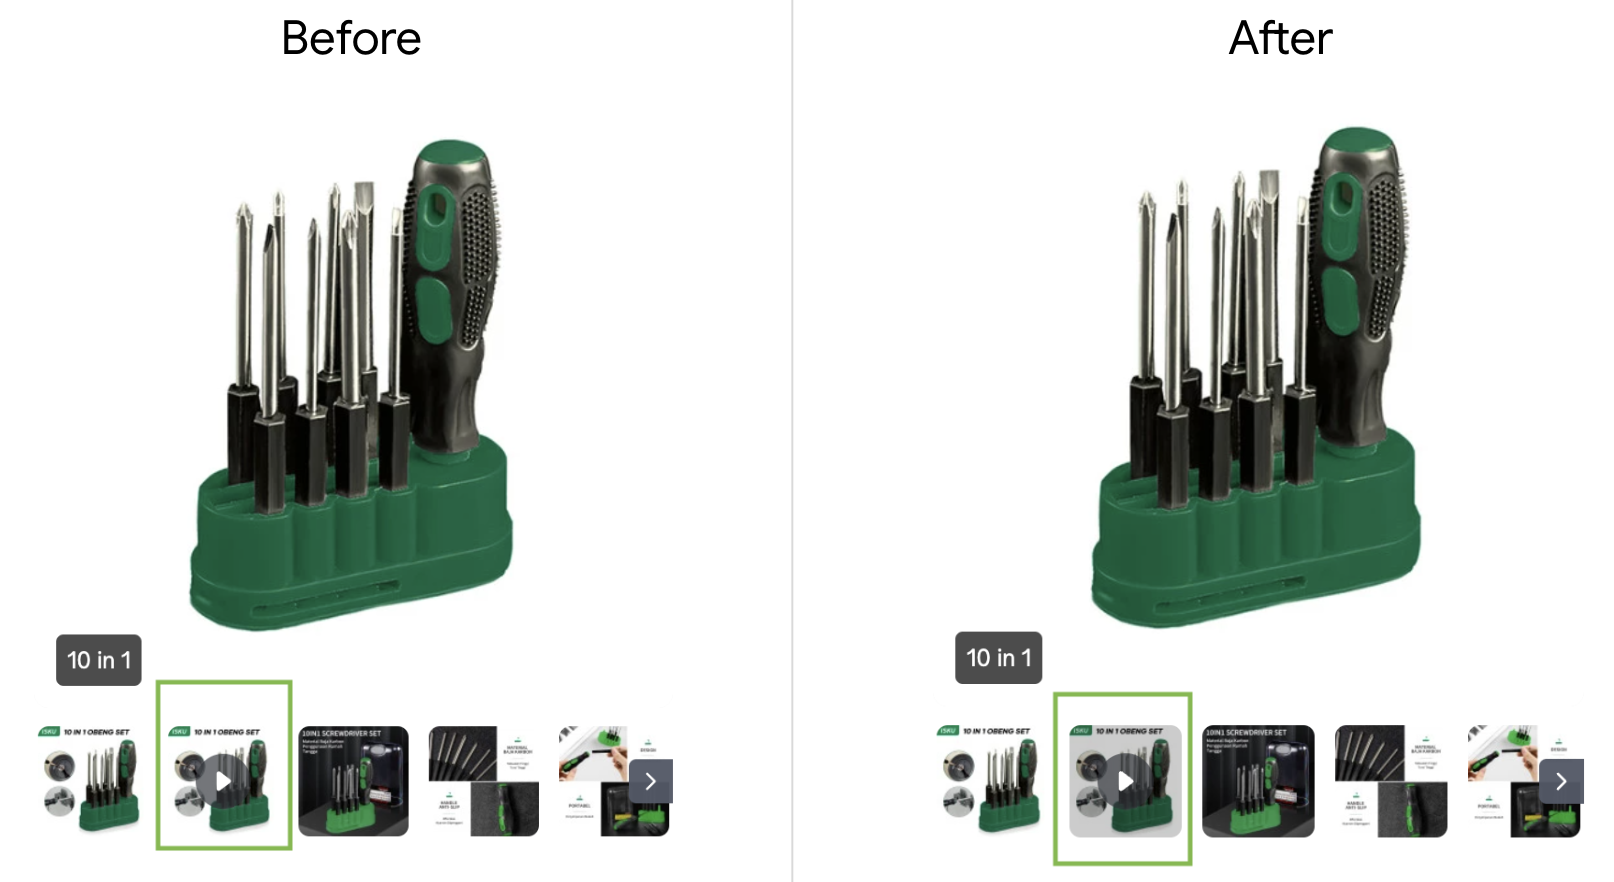 Screenshot of the Tokopedia page before and after the use of the has selector.